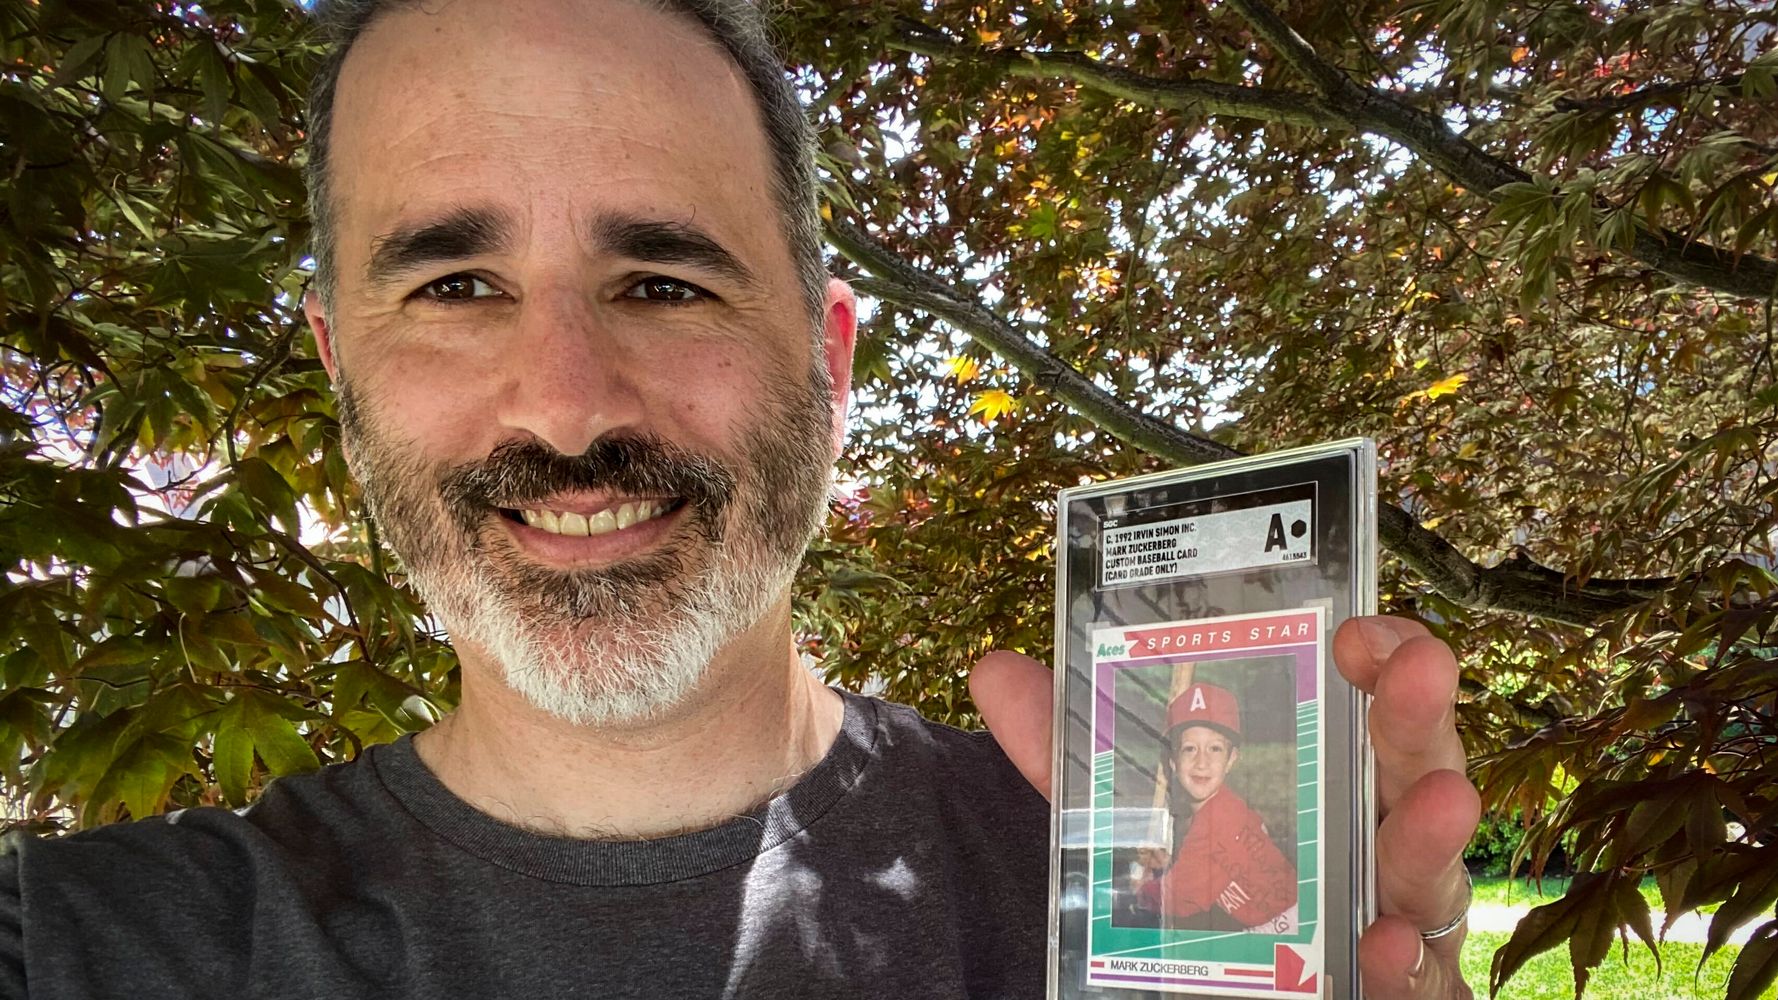 Camp counselor sells baseball card signed by former camper Mark Zuckerberg